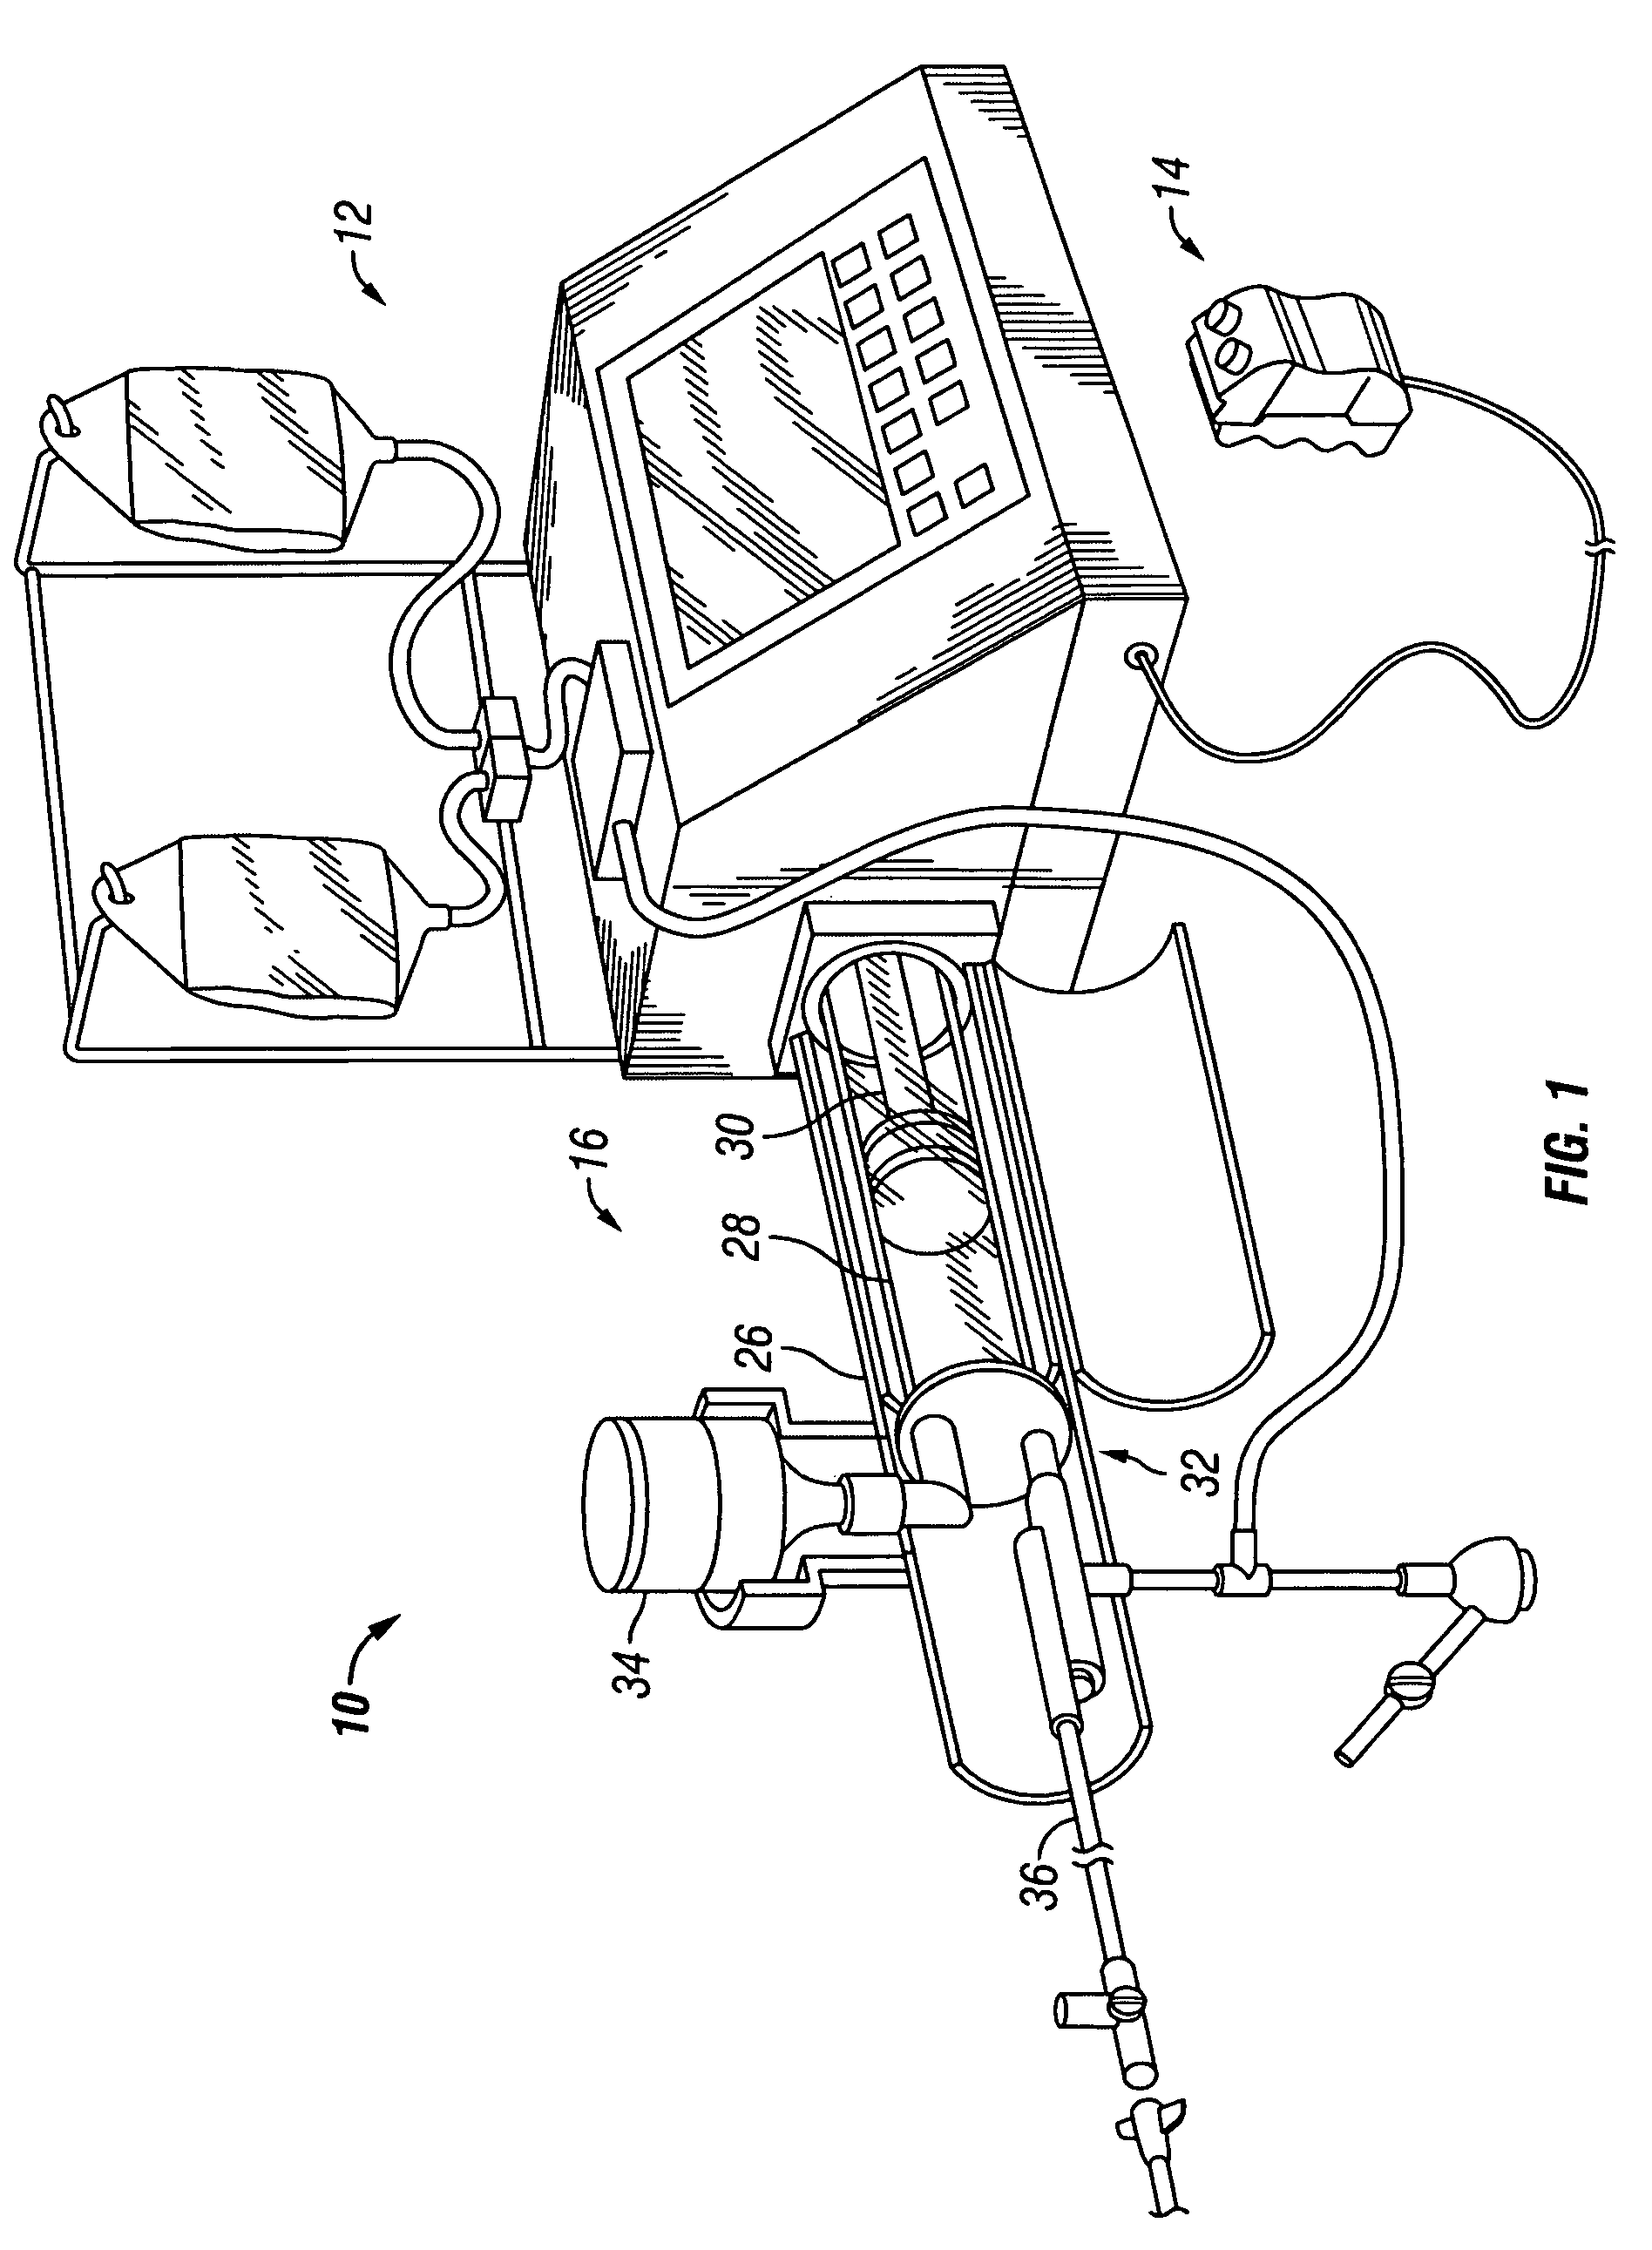 Fluid injector system